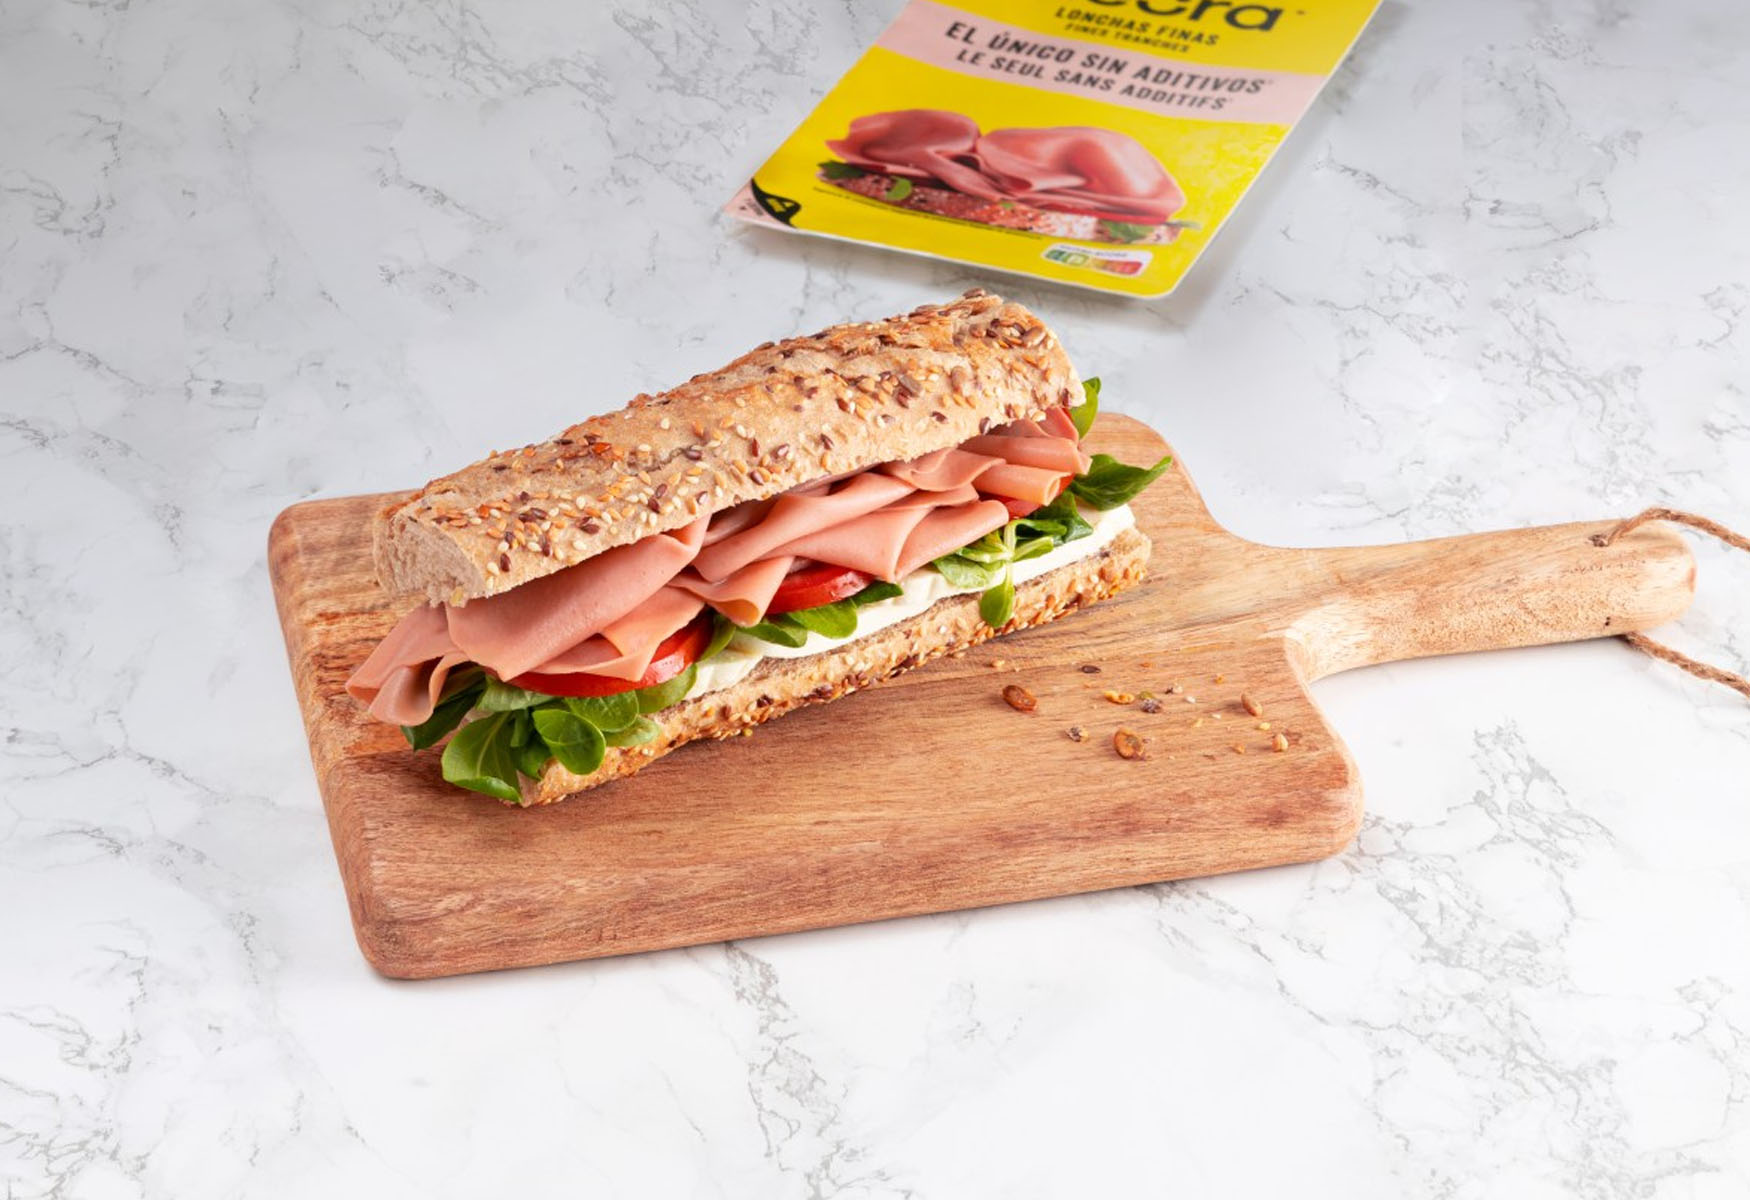 Heura Introduces “York Ham Style Slices” To Its 100% Plant-Based Vegan Mix